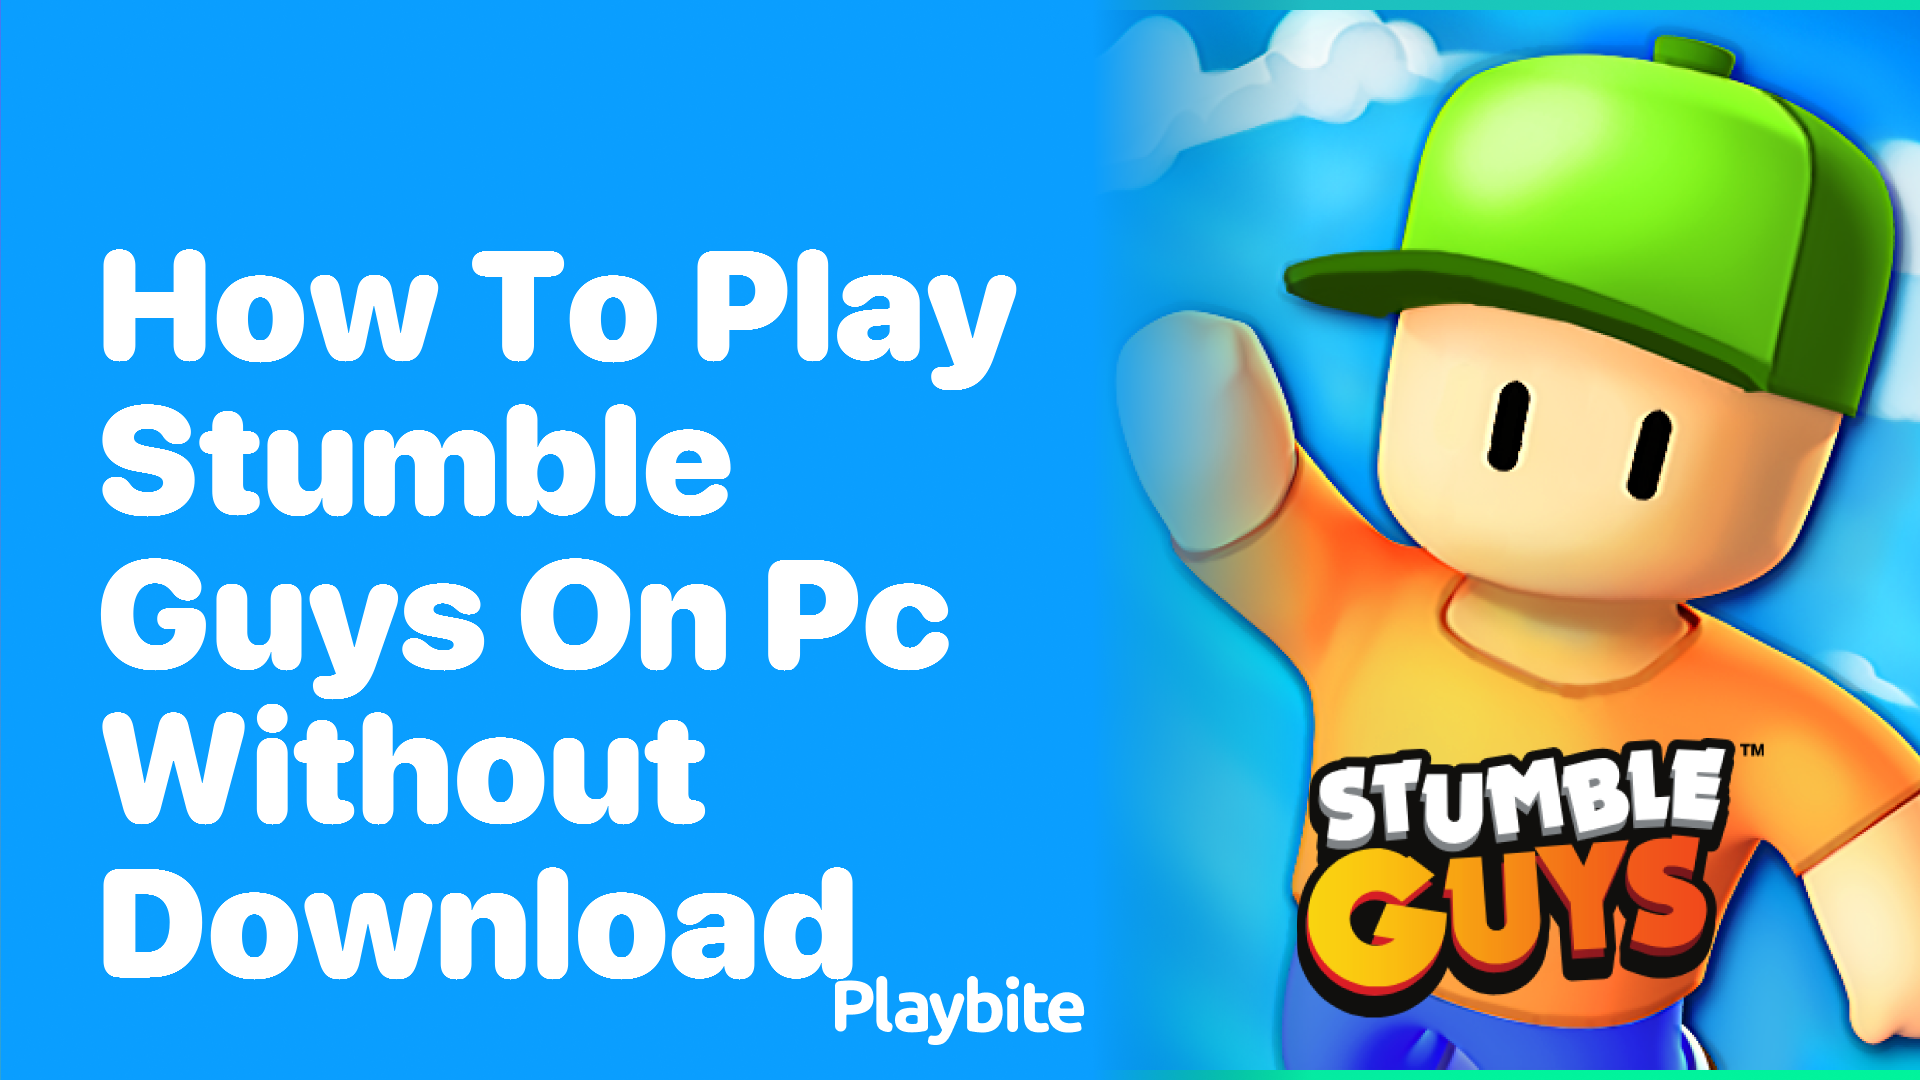 How to Play Stumble Guys on PC Without Downloading it